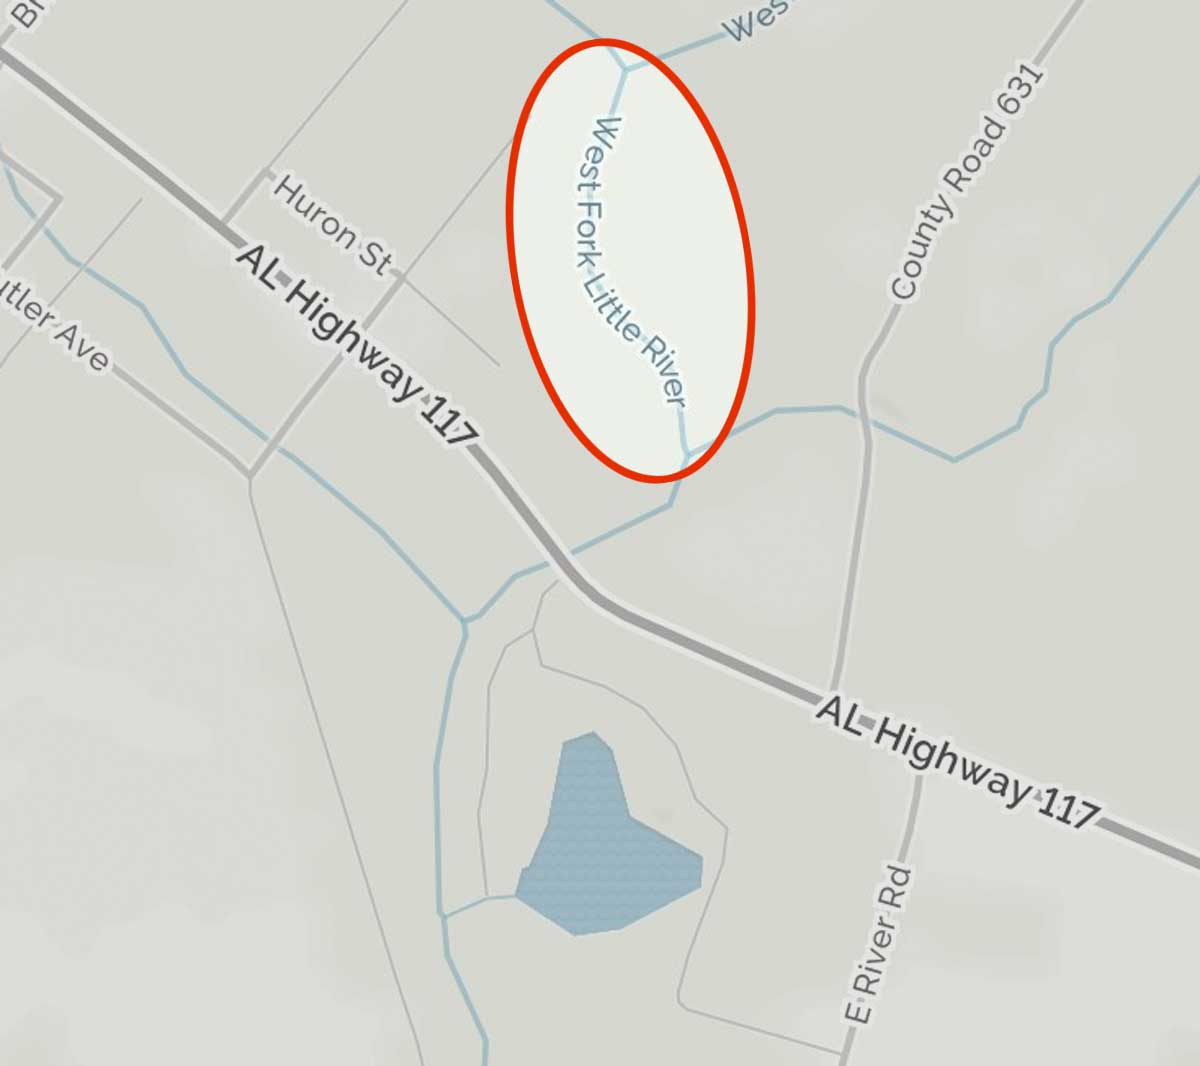 Enlargement of MapQuest map showing river name